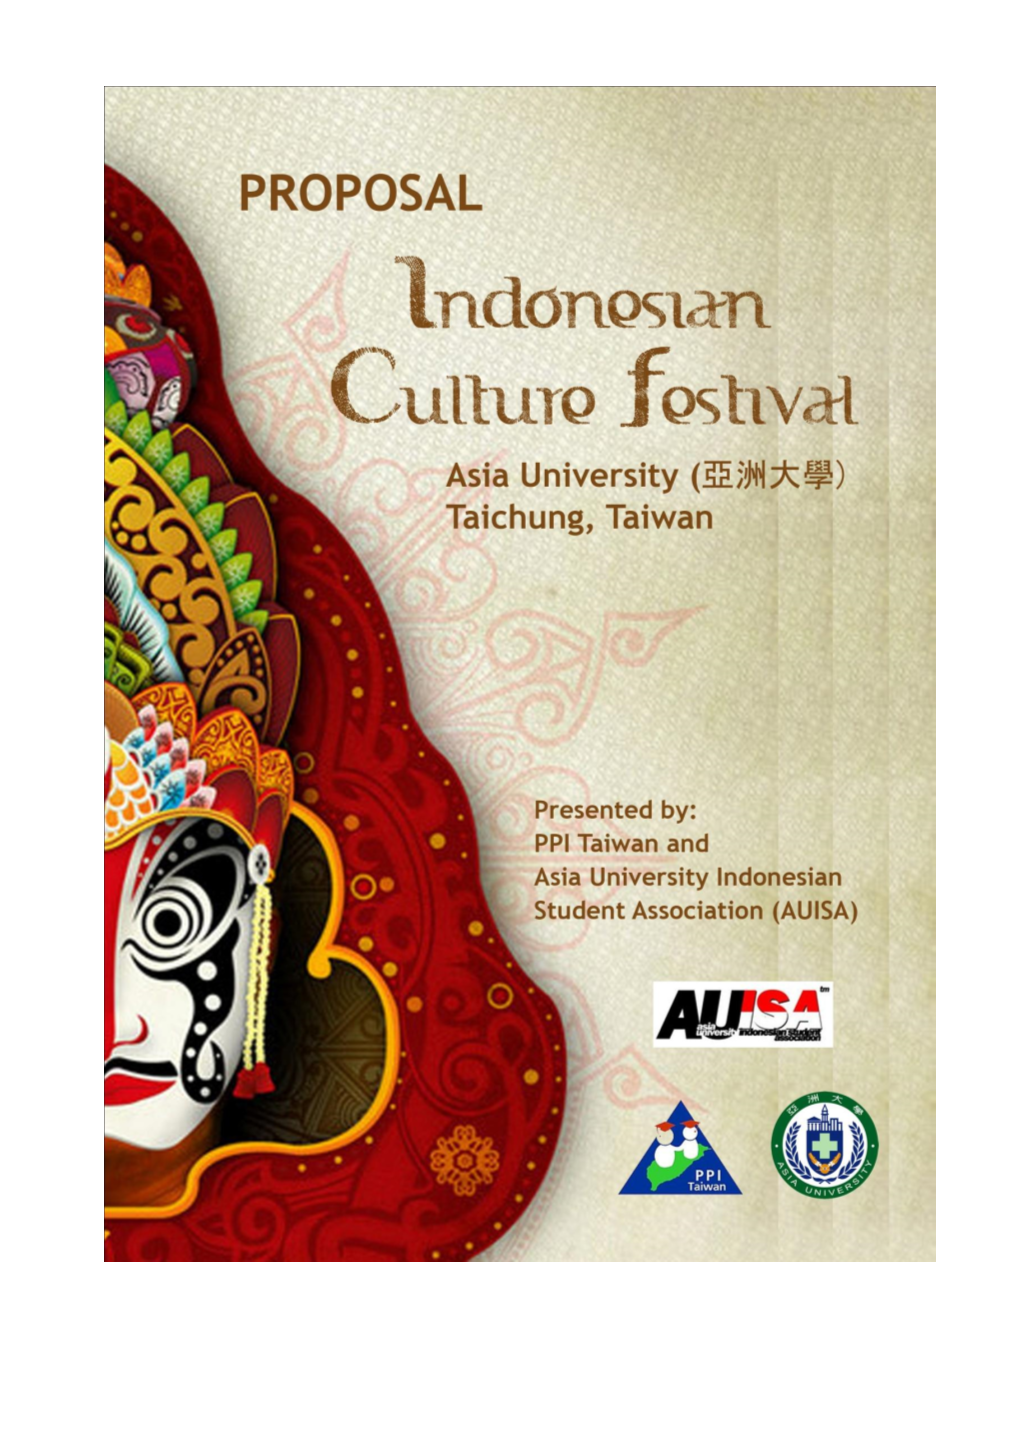 Indonesian Culture Festival 2012 – the Proposal